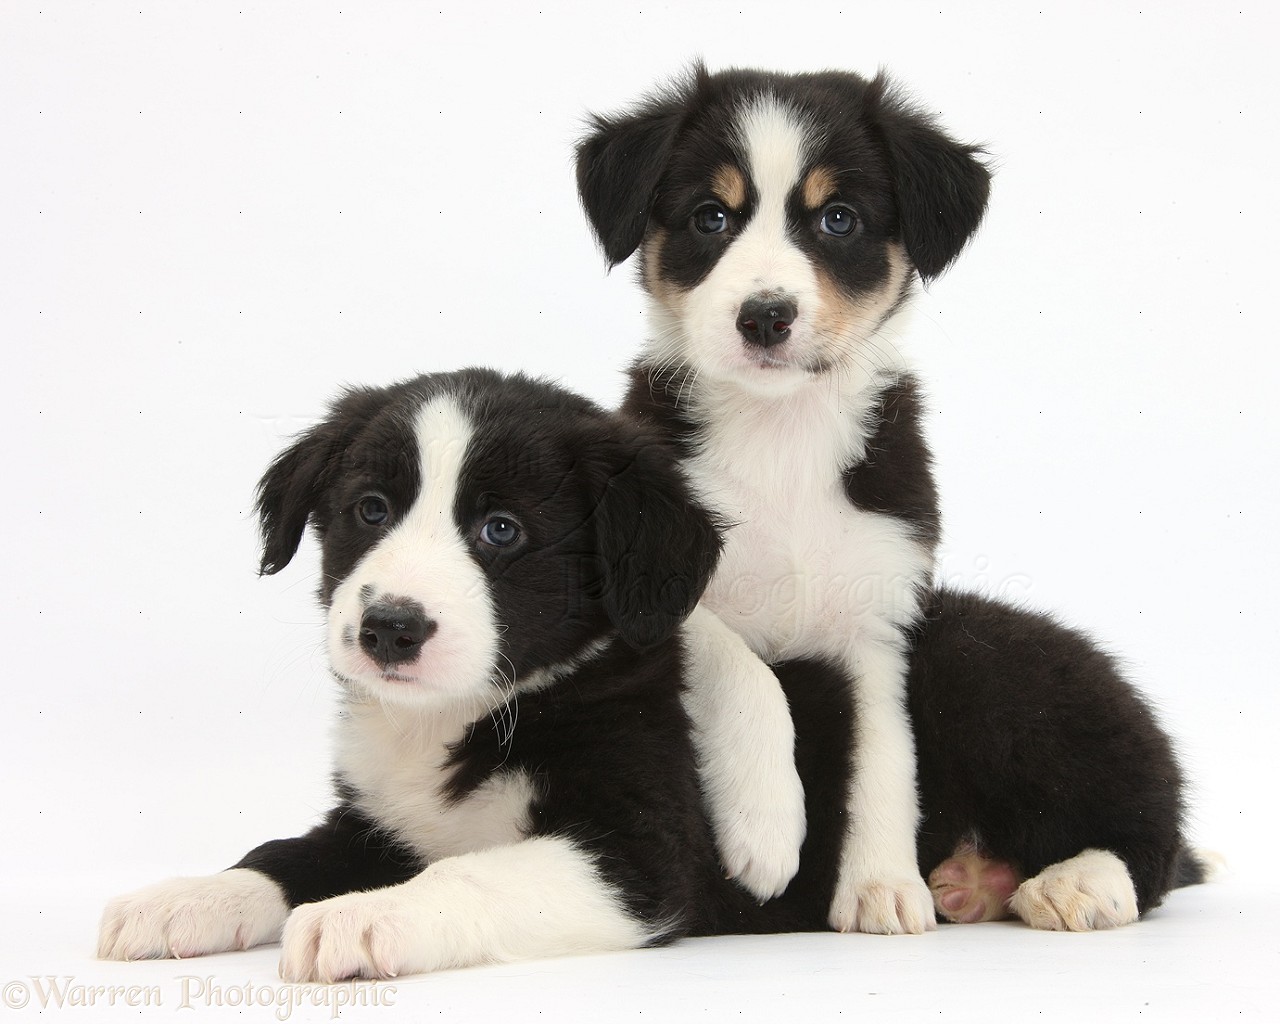 Dogs Border Collie puppies, 6 weeks old photo WP32562